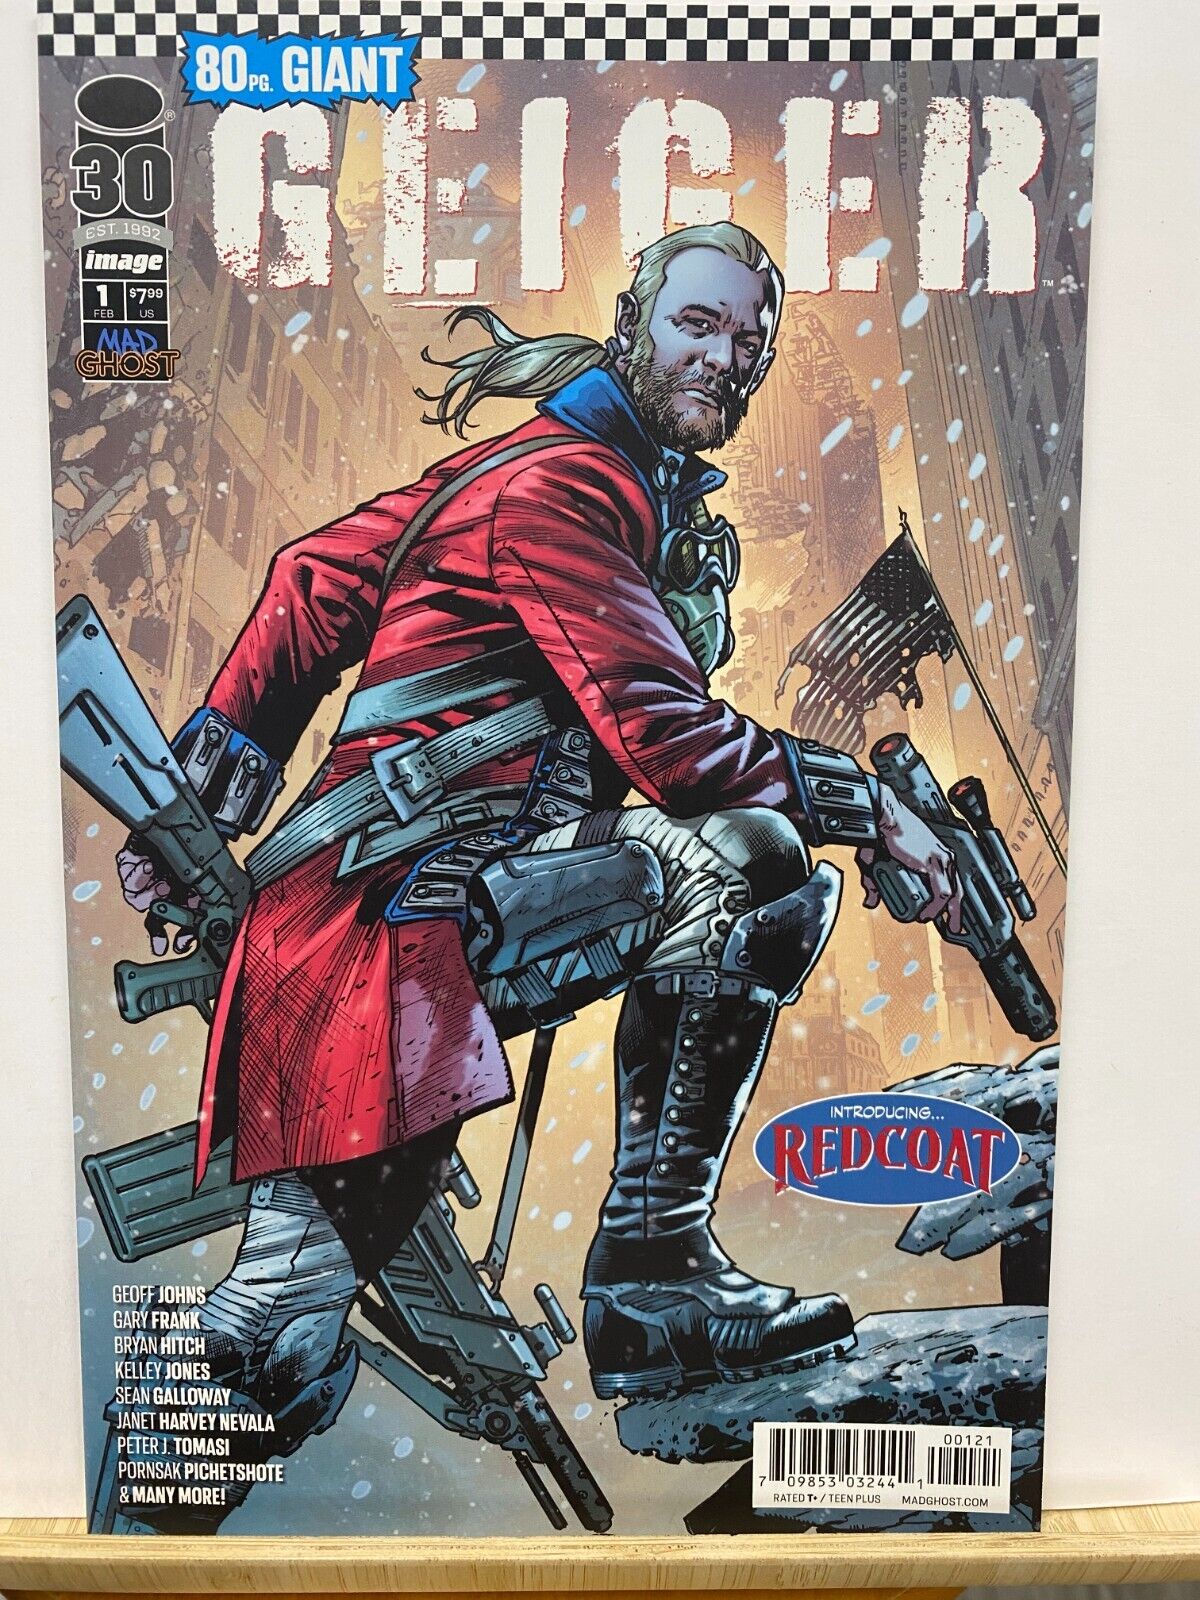 Geiger 80 page pg giant #1 First cover and app Redcoat Hitch Variant NM